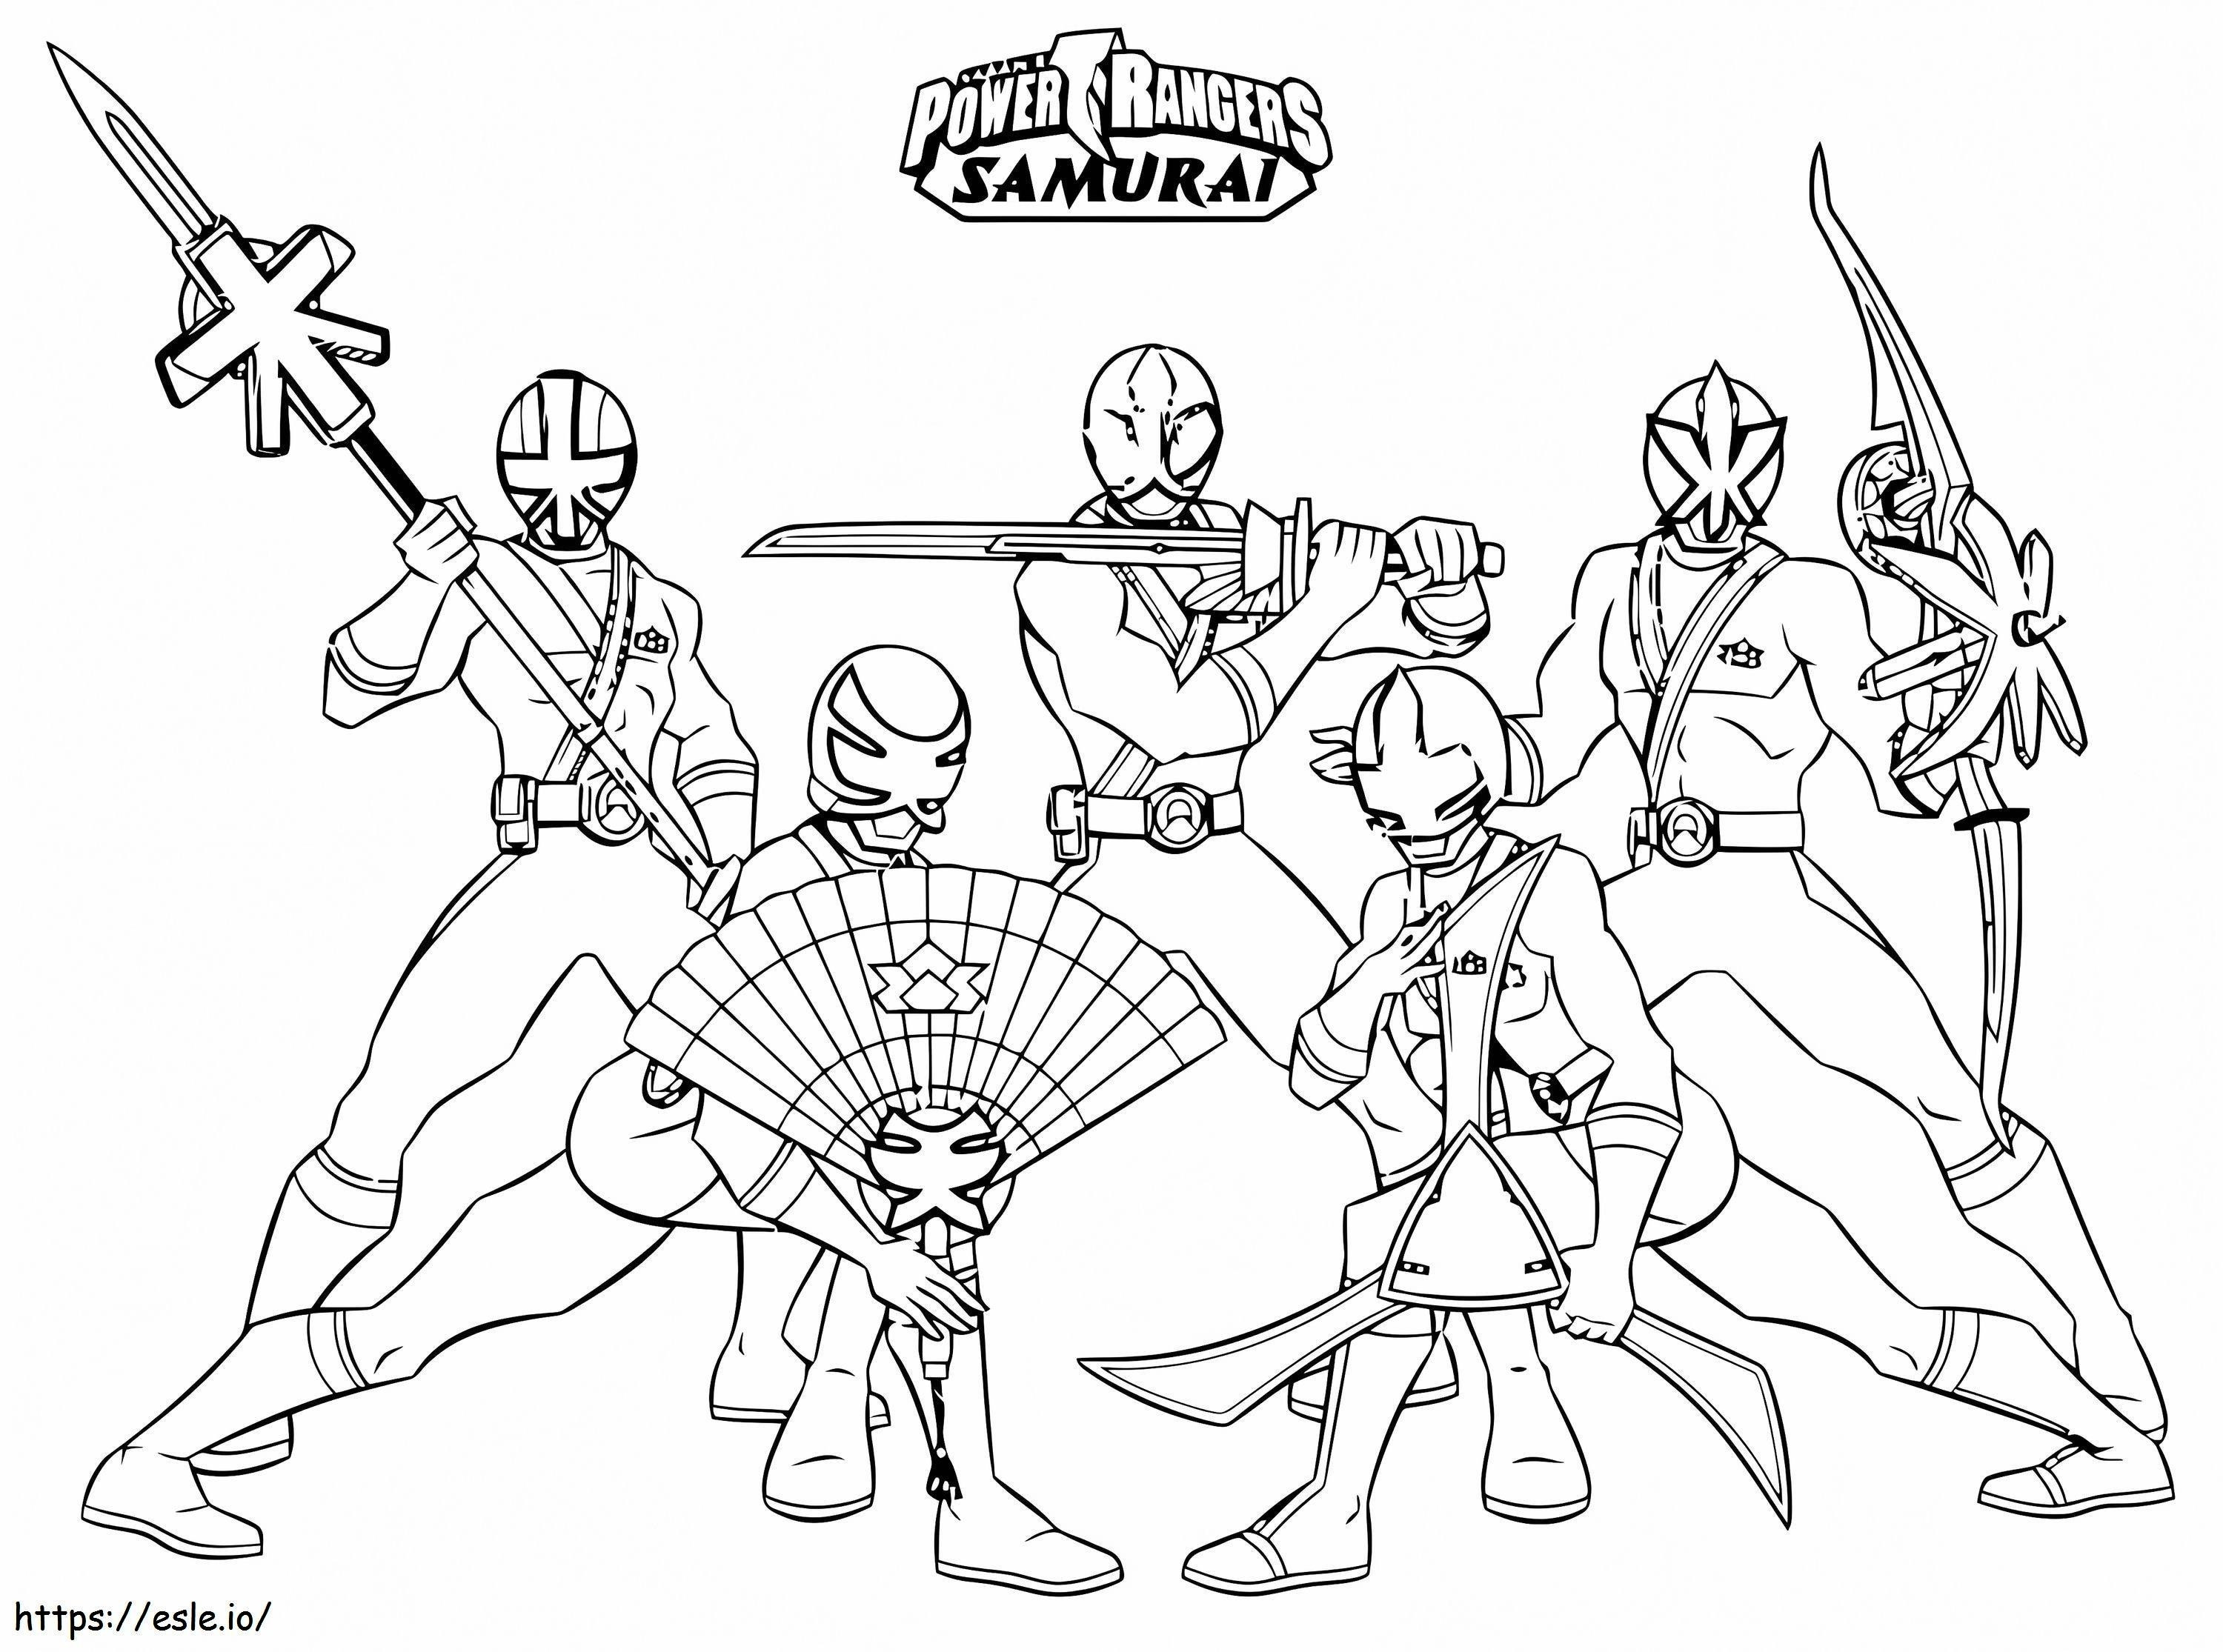 1542765316 Impressive Power Rangers Samurai Online For Boys To Print Free coloring page